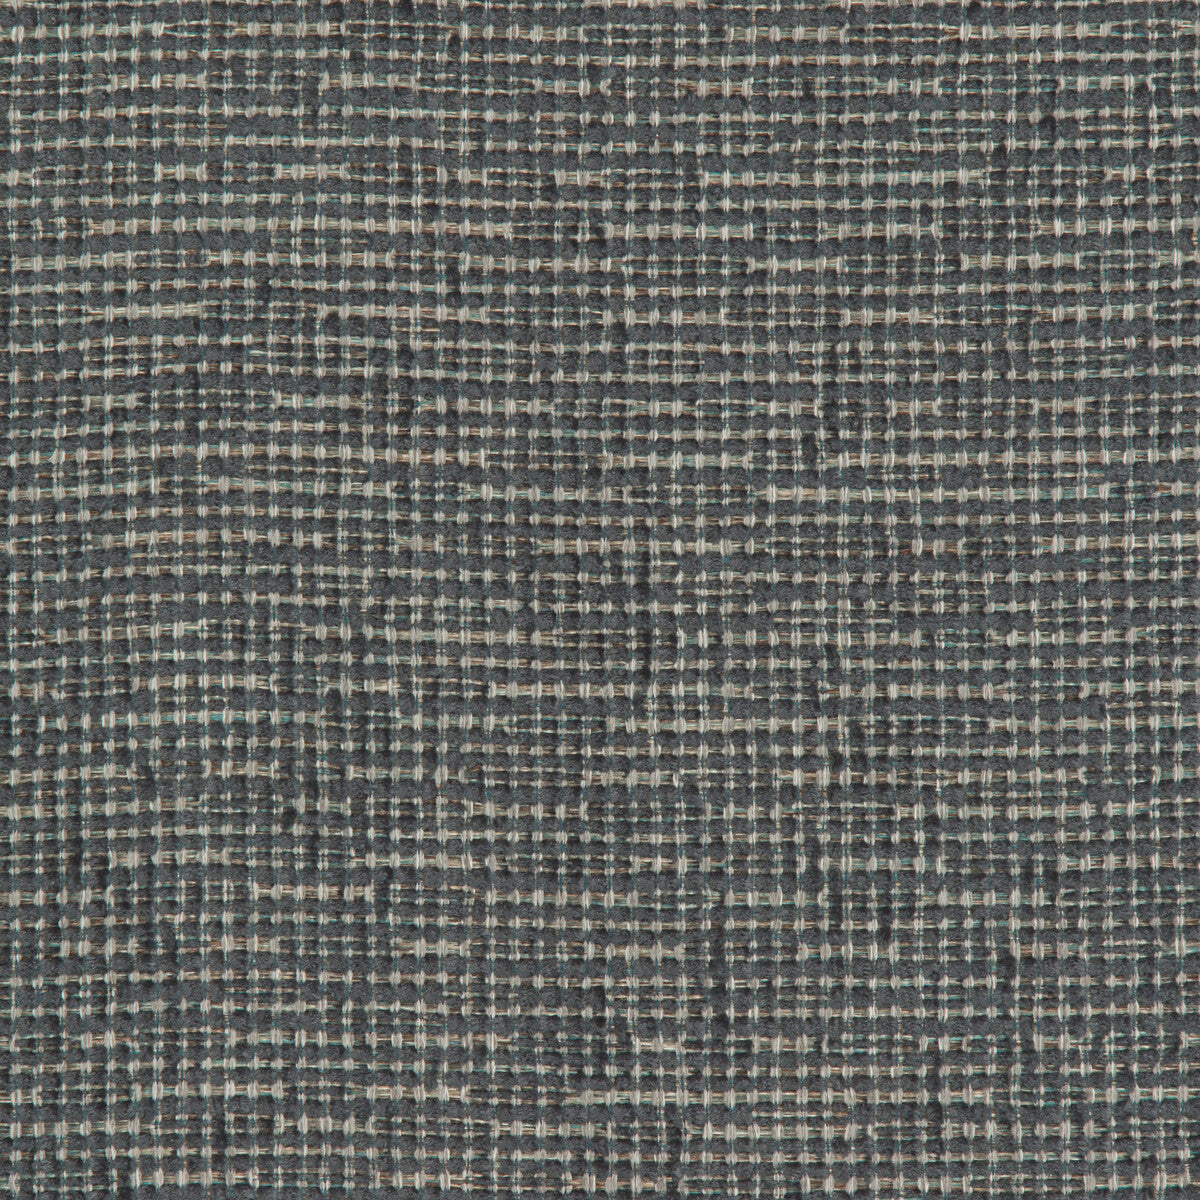 Kravet Smart fabric in 35968-5 color - pattern 35968.5.0 - by Kravet Smart in the Performance Crypton Home collection